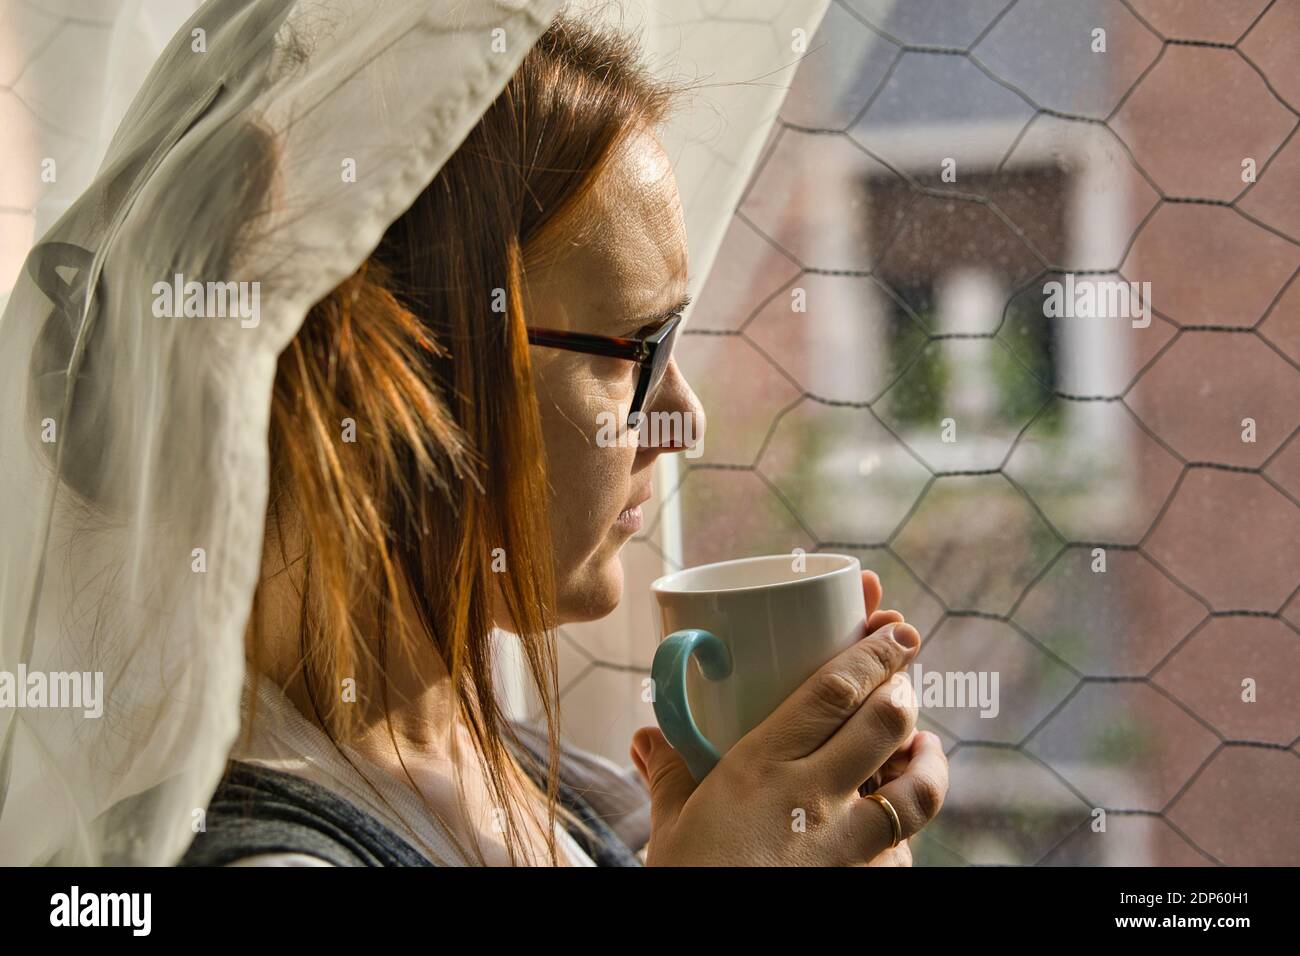 beautiful woman looking out the window melancholy on a rainy afternoon having a coffee or tea. bad weather depression concept Stock Photo